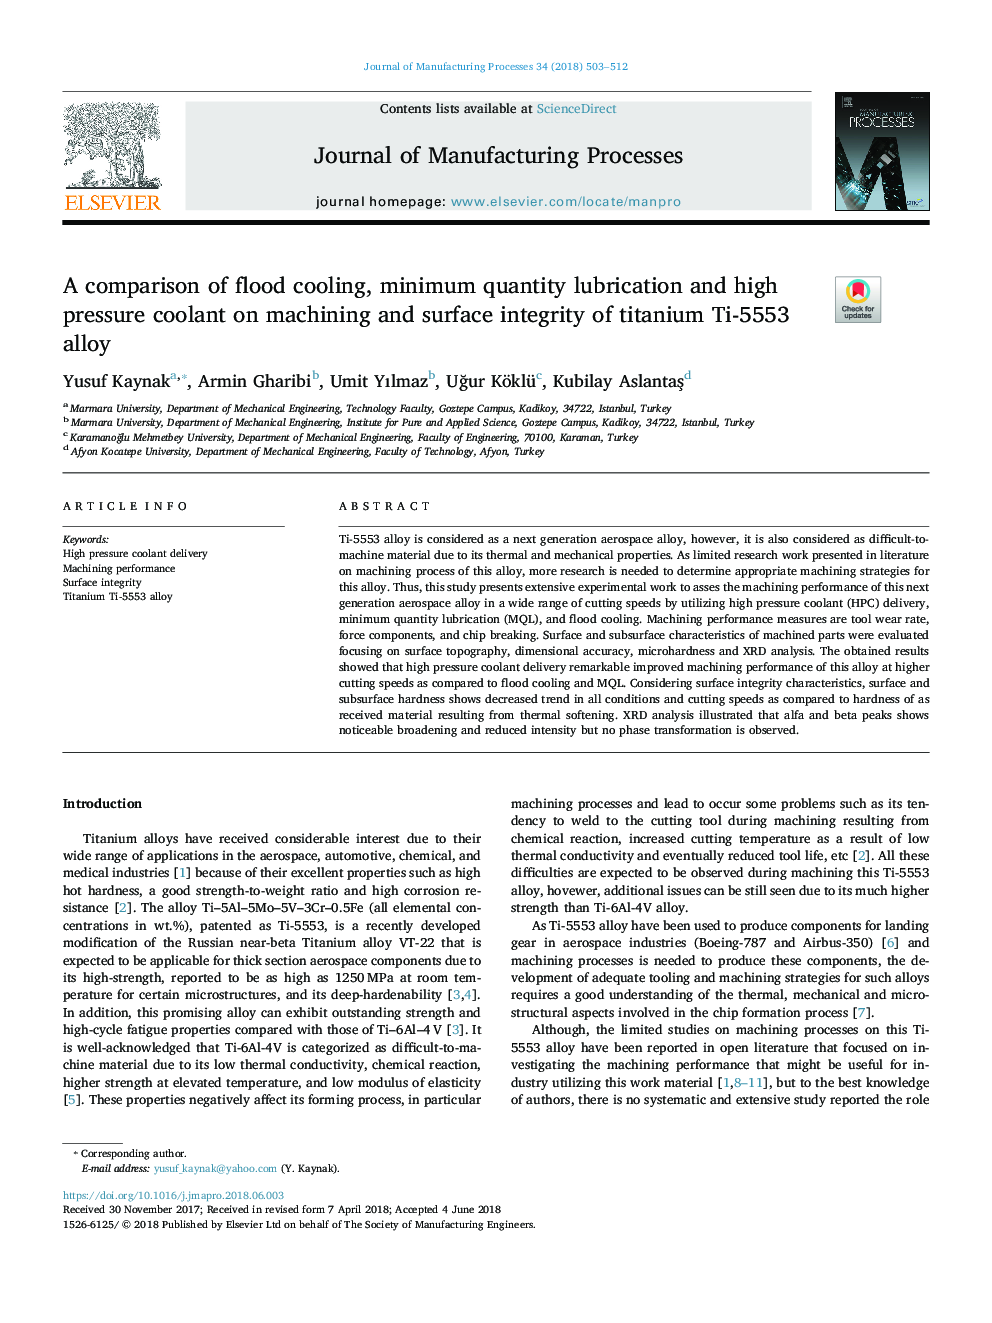 A comparison of flood cooling, minimum quantity lubrication and high pressure coolant on machining and surface integrity of titanium Ti-5553 alloy